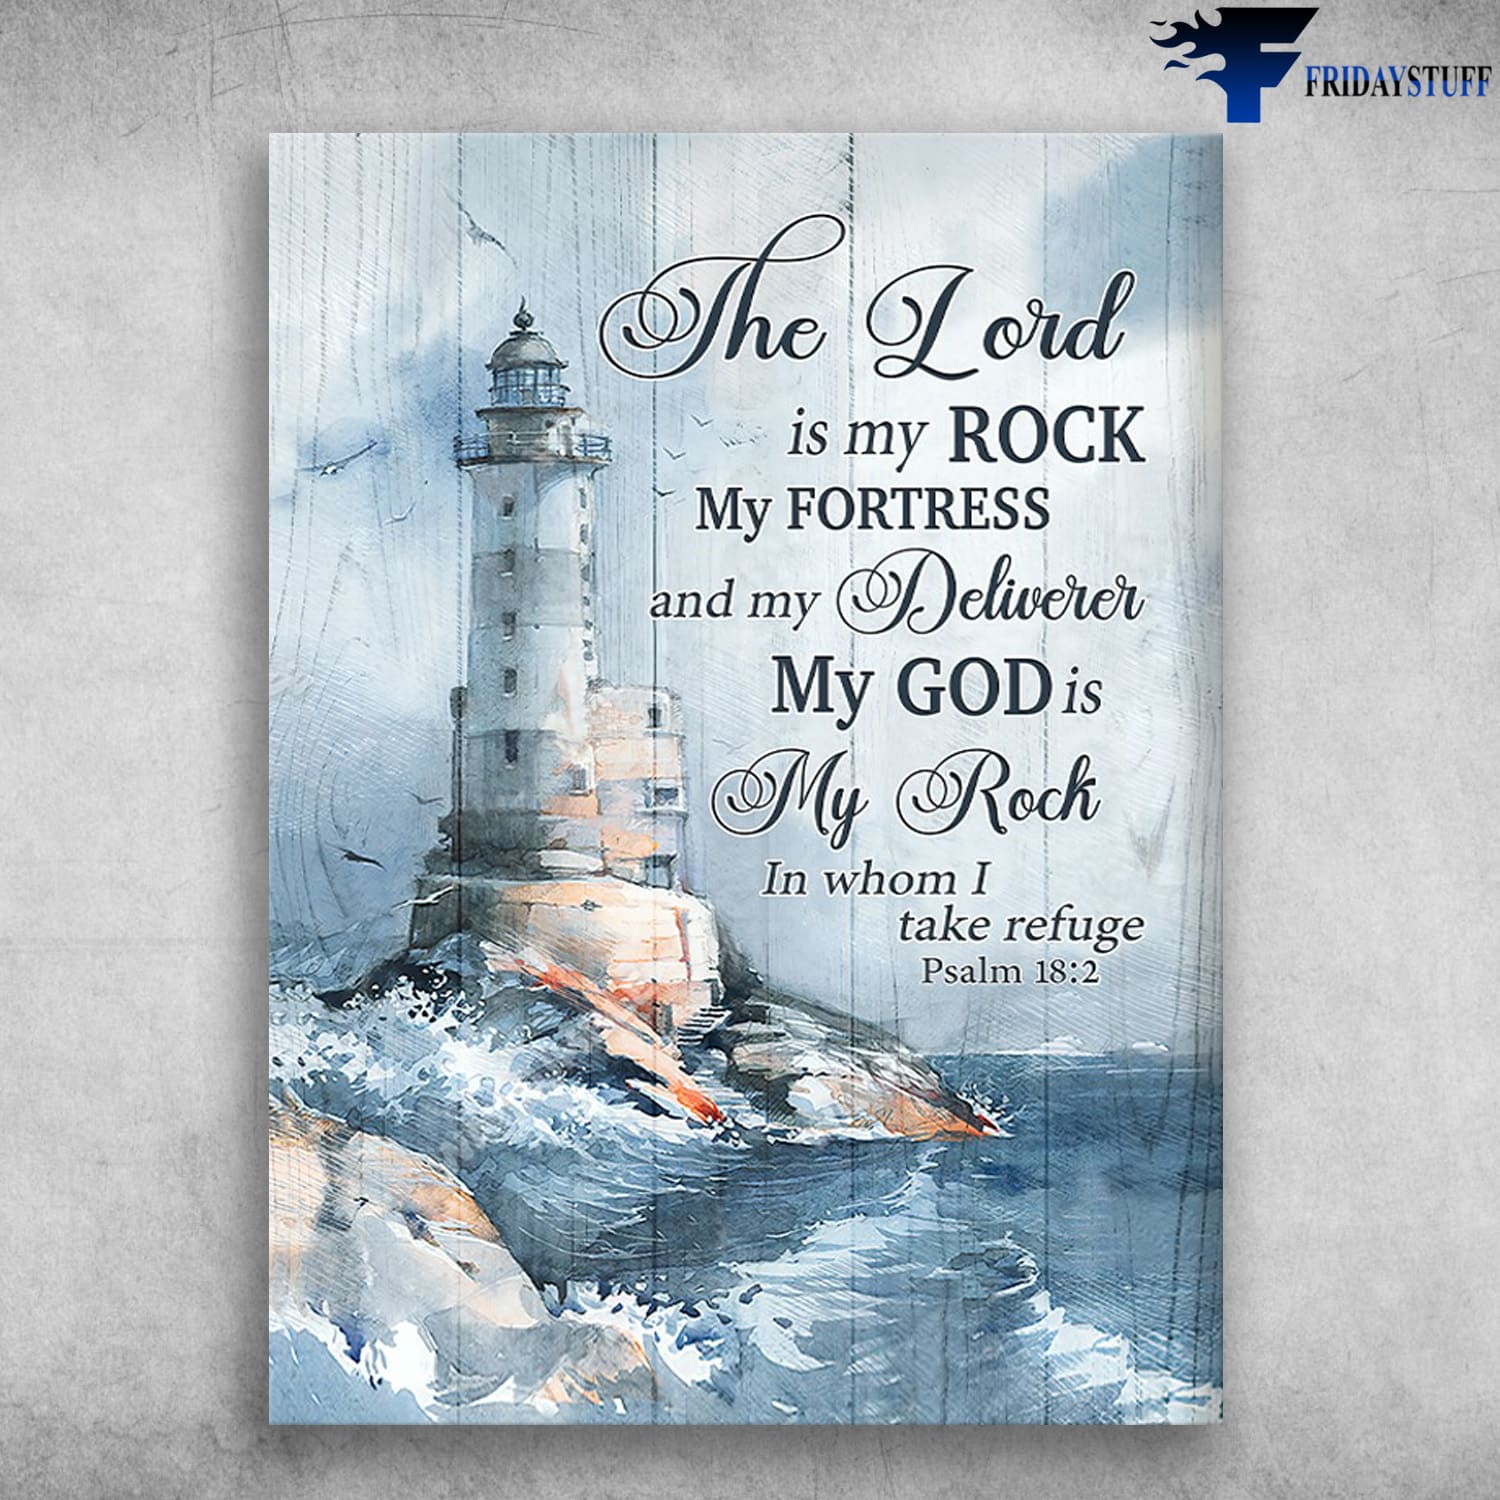 Lighthouse Poster, The Lord Is My Rock, My Fortress, And My Deliverer, My God Is My Rock, In Whom I Take Refuge